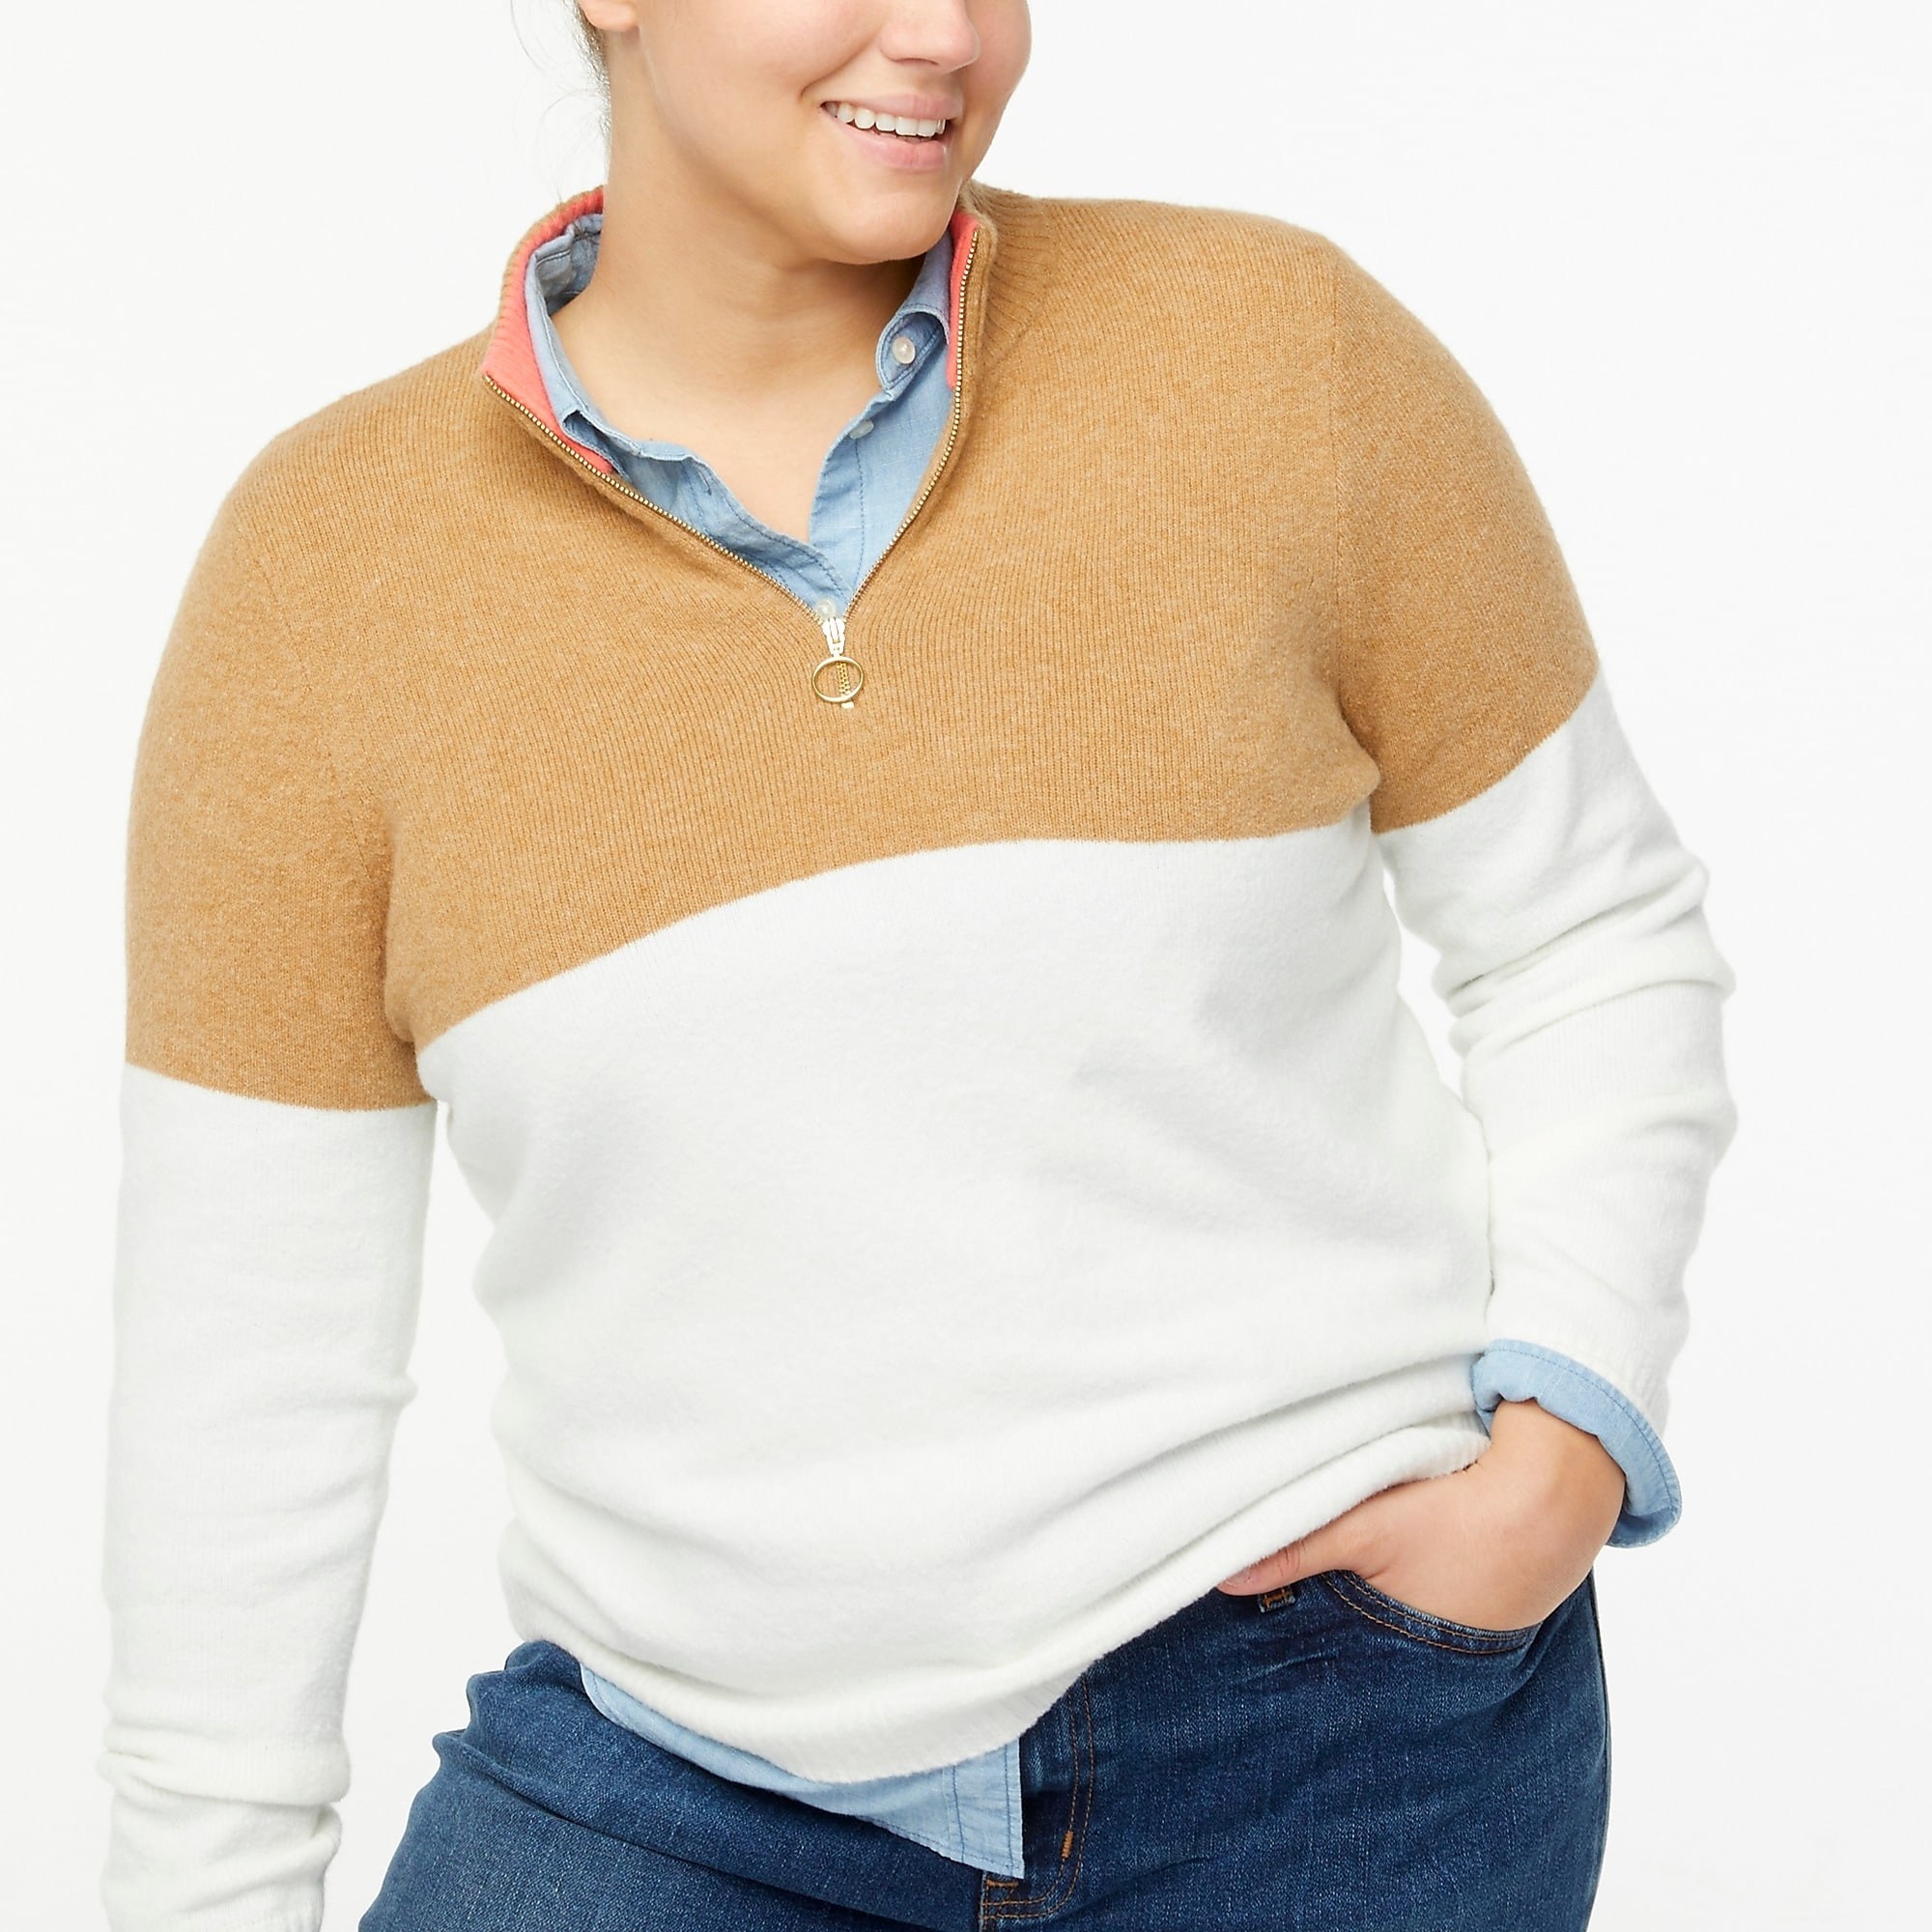 Model wearing tan and white quarter zip with blue shirt and jeans